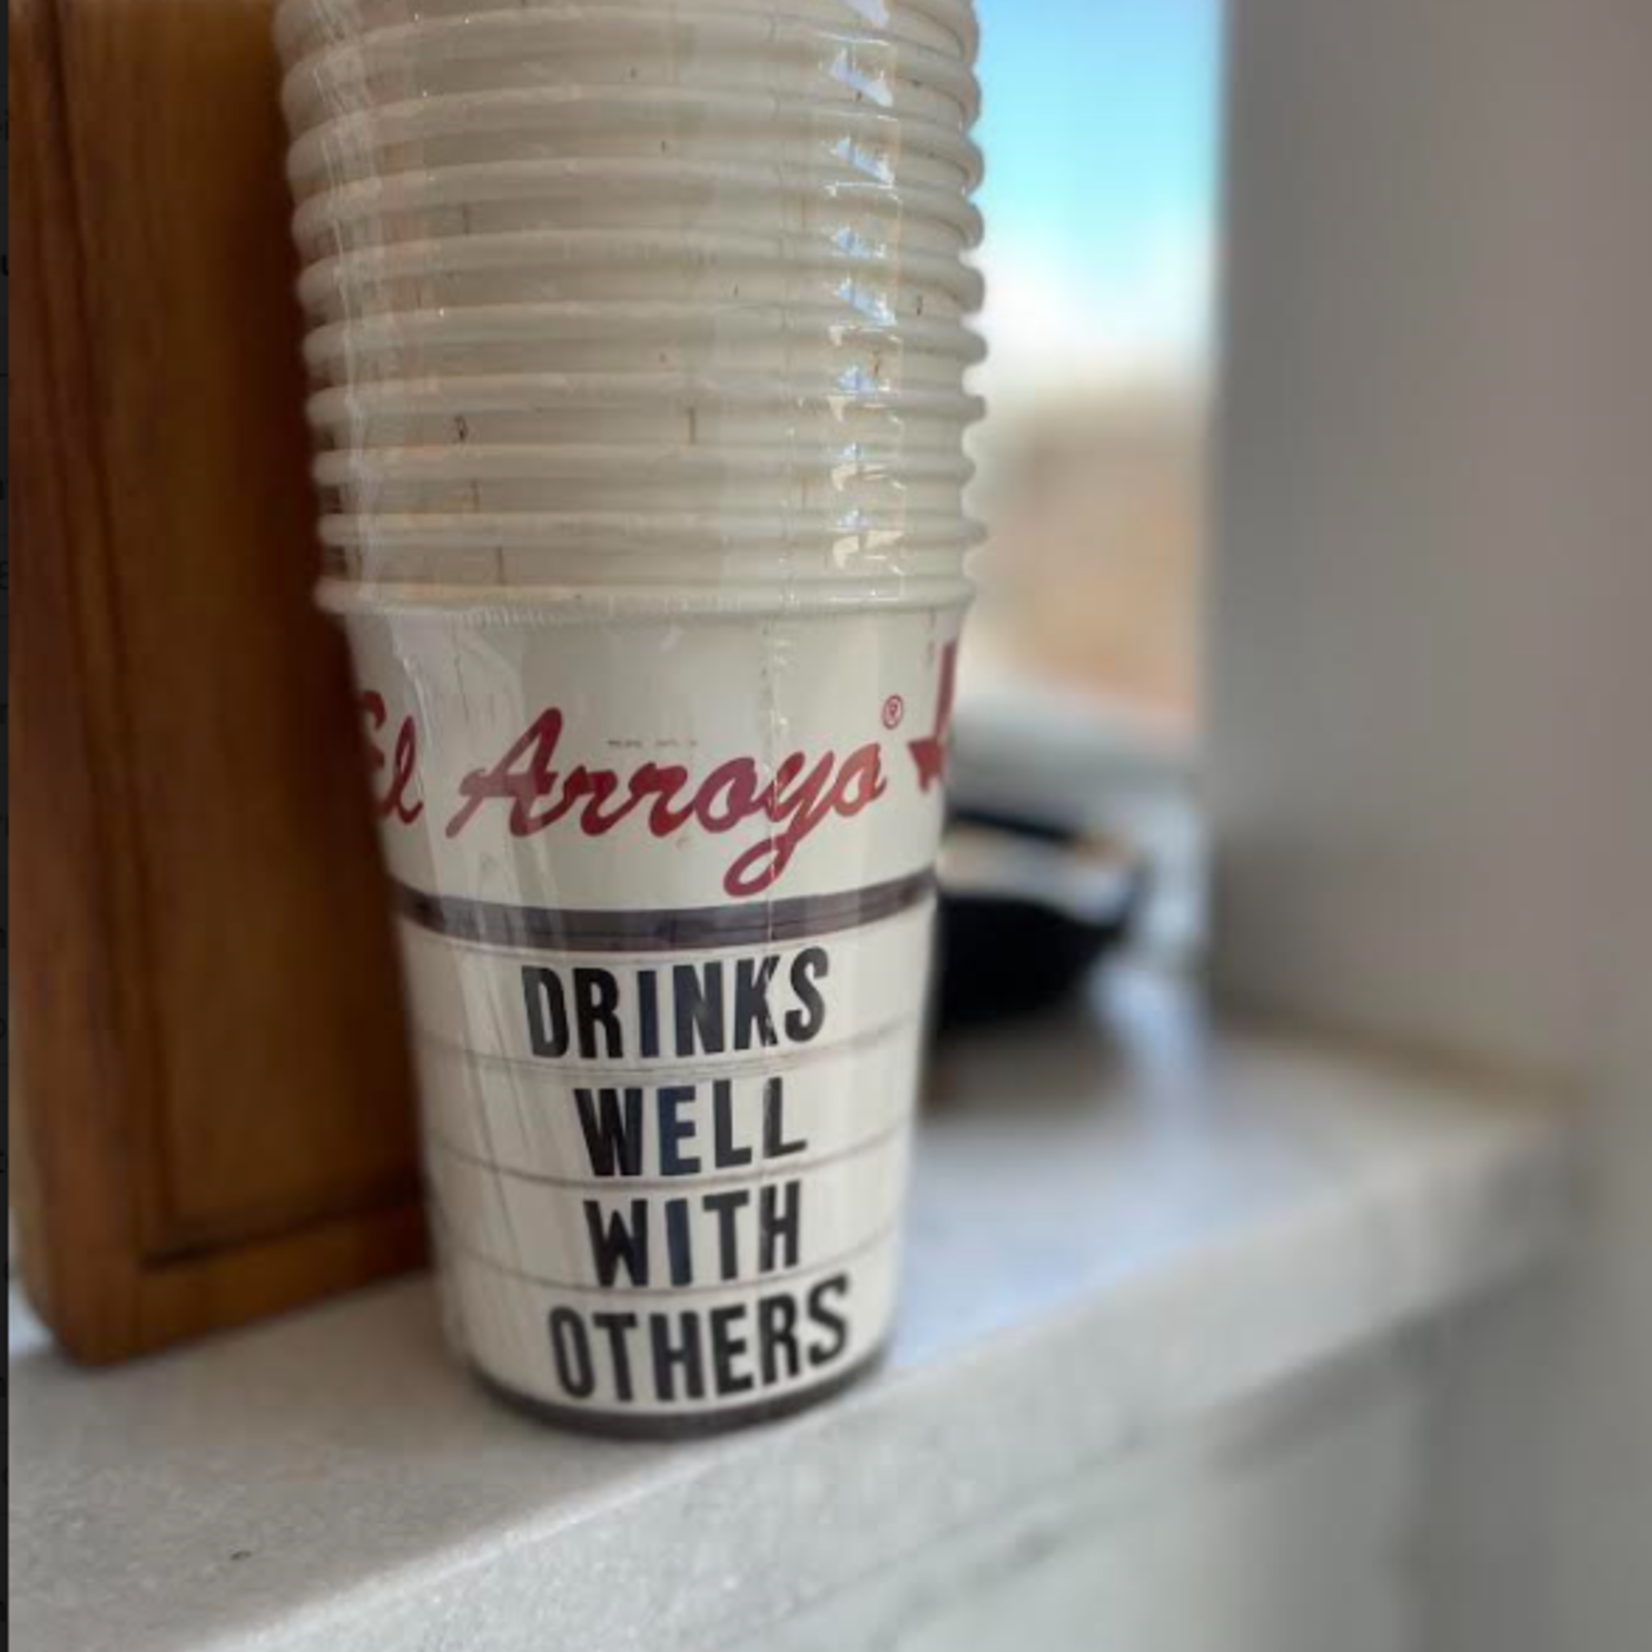 El Arroyo Dinks Well With Others Cups (Pack of 12)